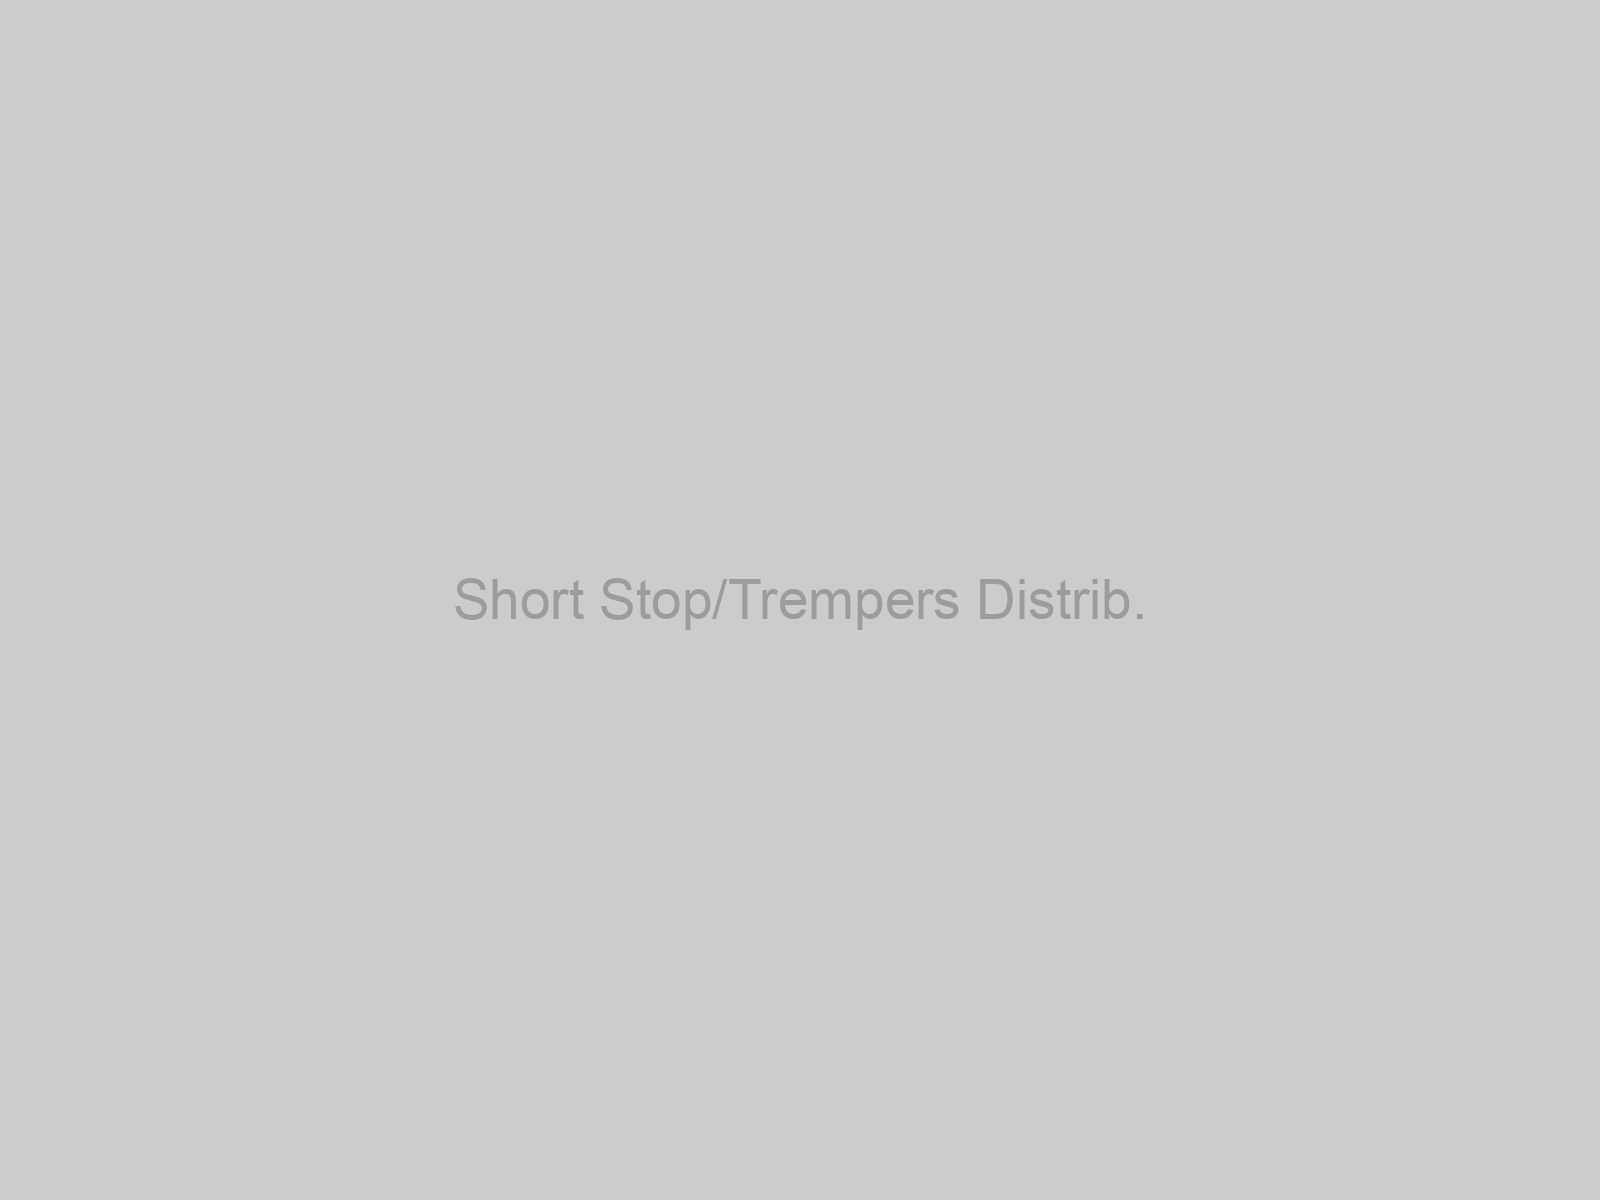 Short Stop/Trempers Distrib.